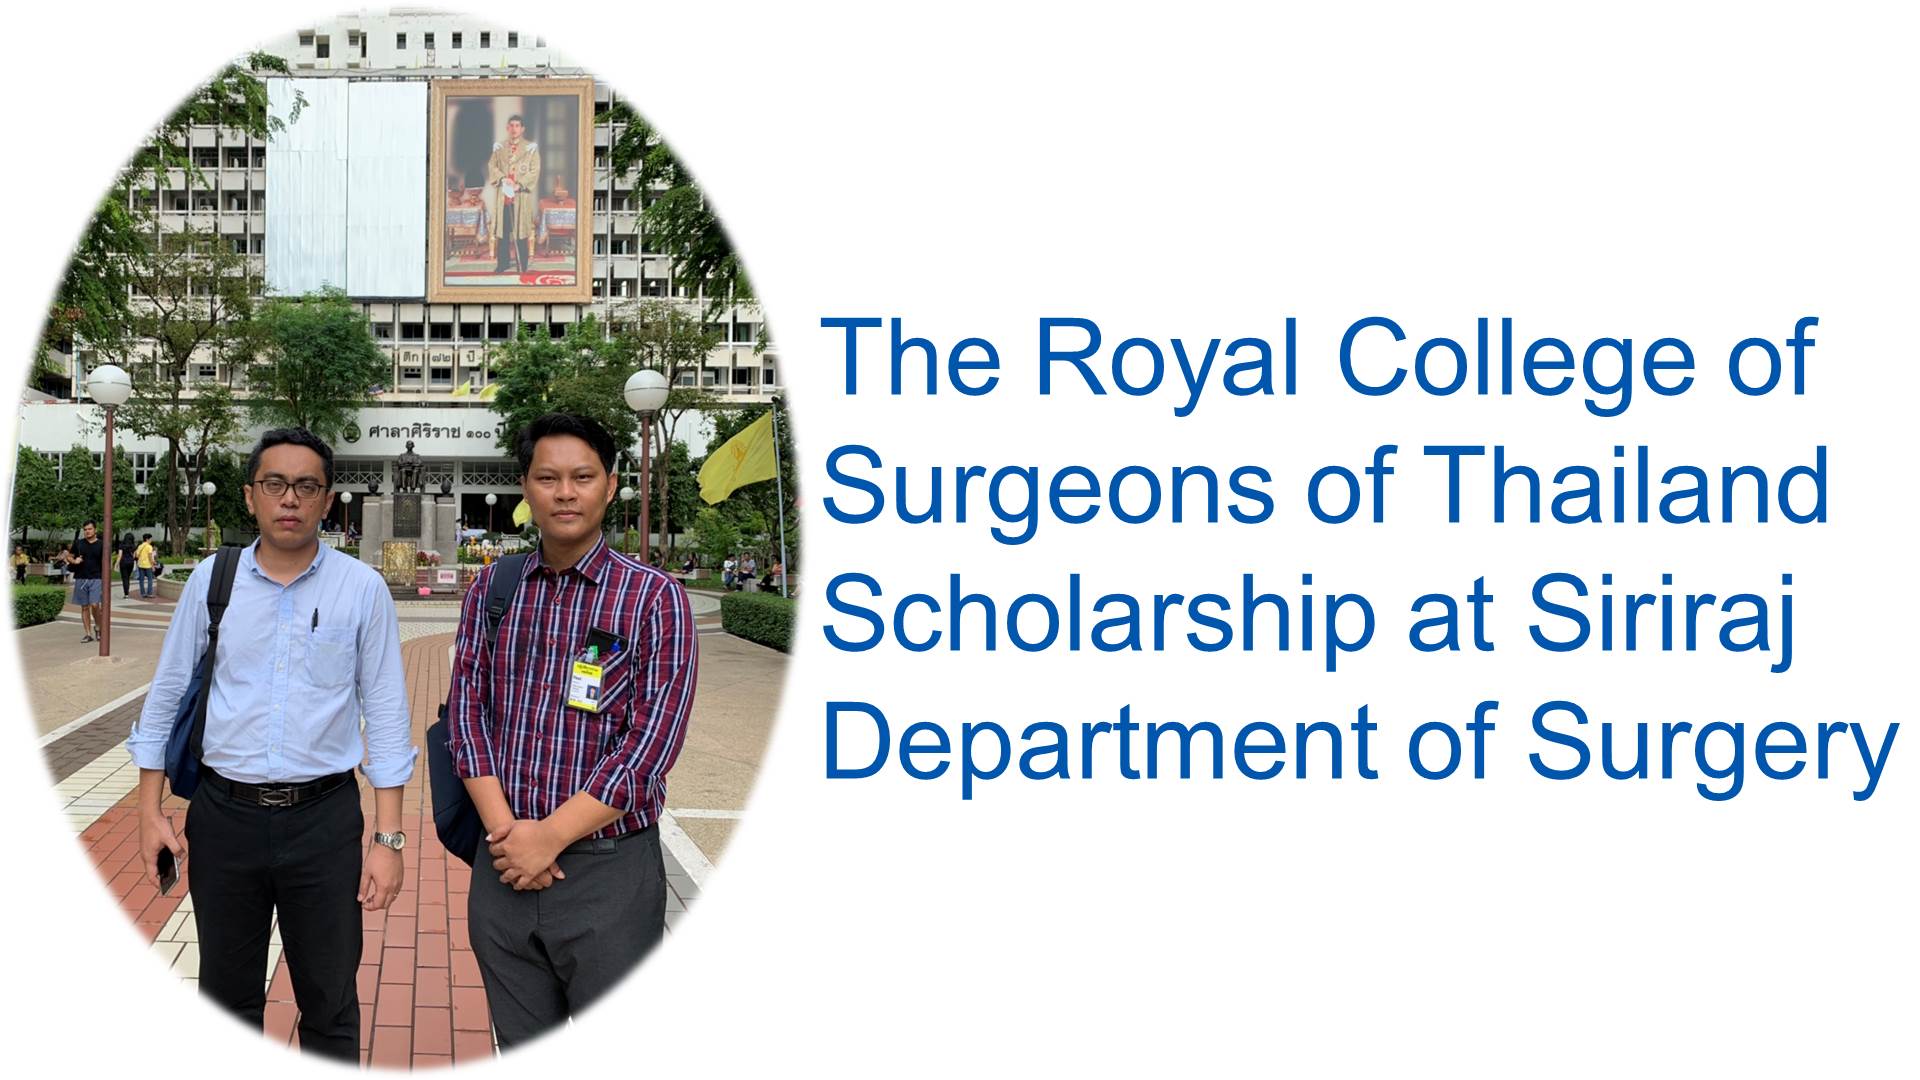 The Myanmar Recepients of Royal College of Surgeons of Thailand Scholarship